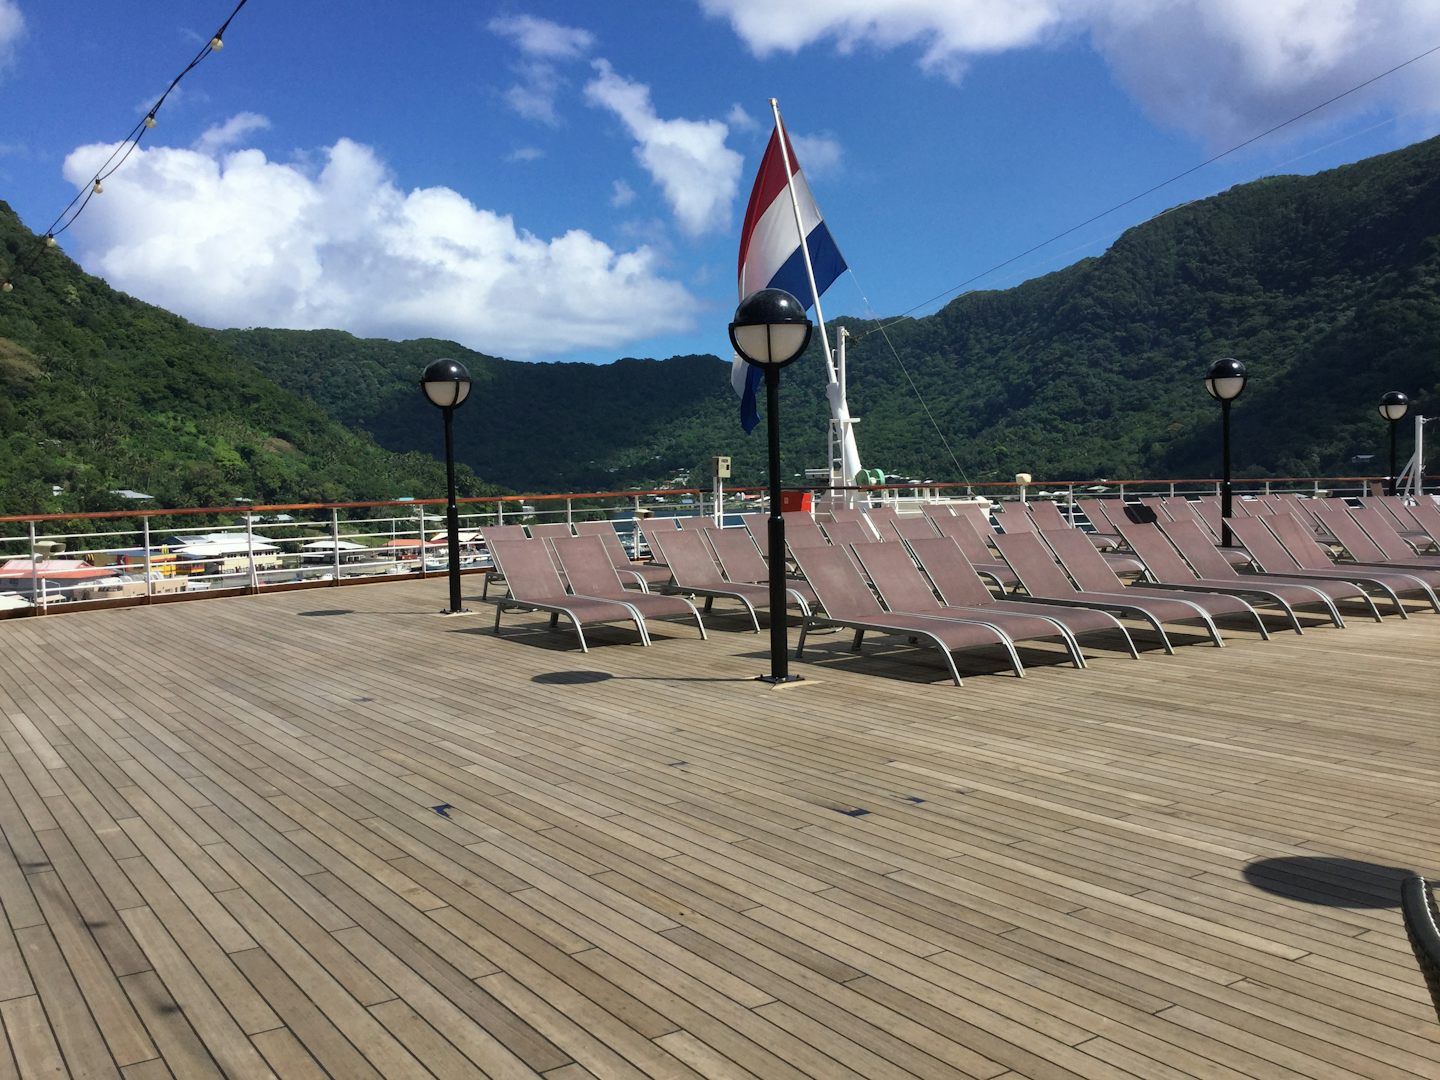 On deck in Pago pago